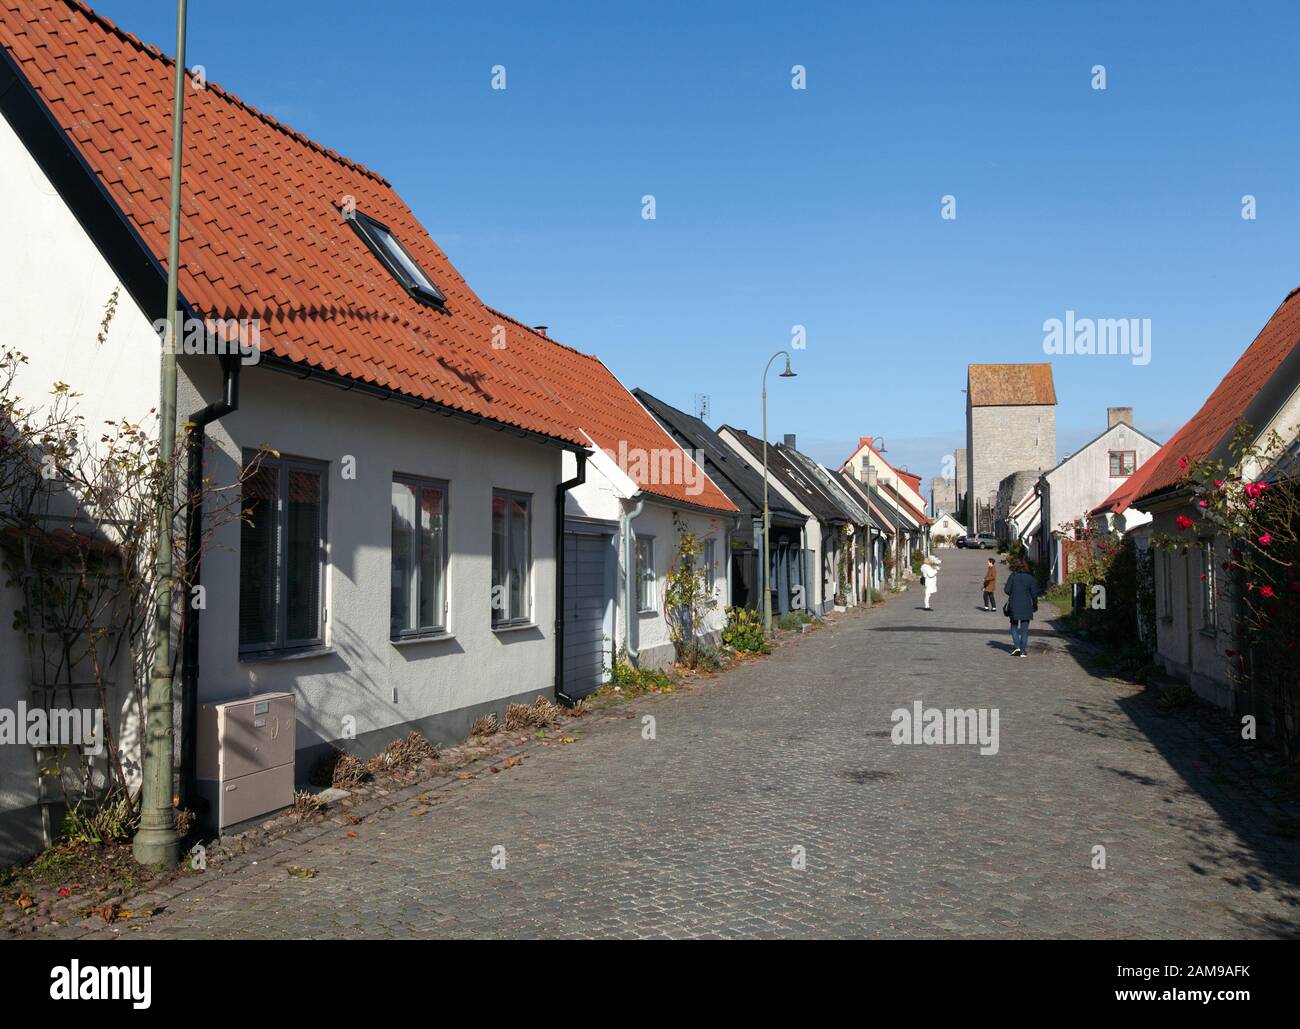 VISBY, SWEDEN ON OCTOBER 12, 2019. Street view of buildings. Old house, homes in the town. Unidentified folk. Editorial use. Stock Photo